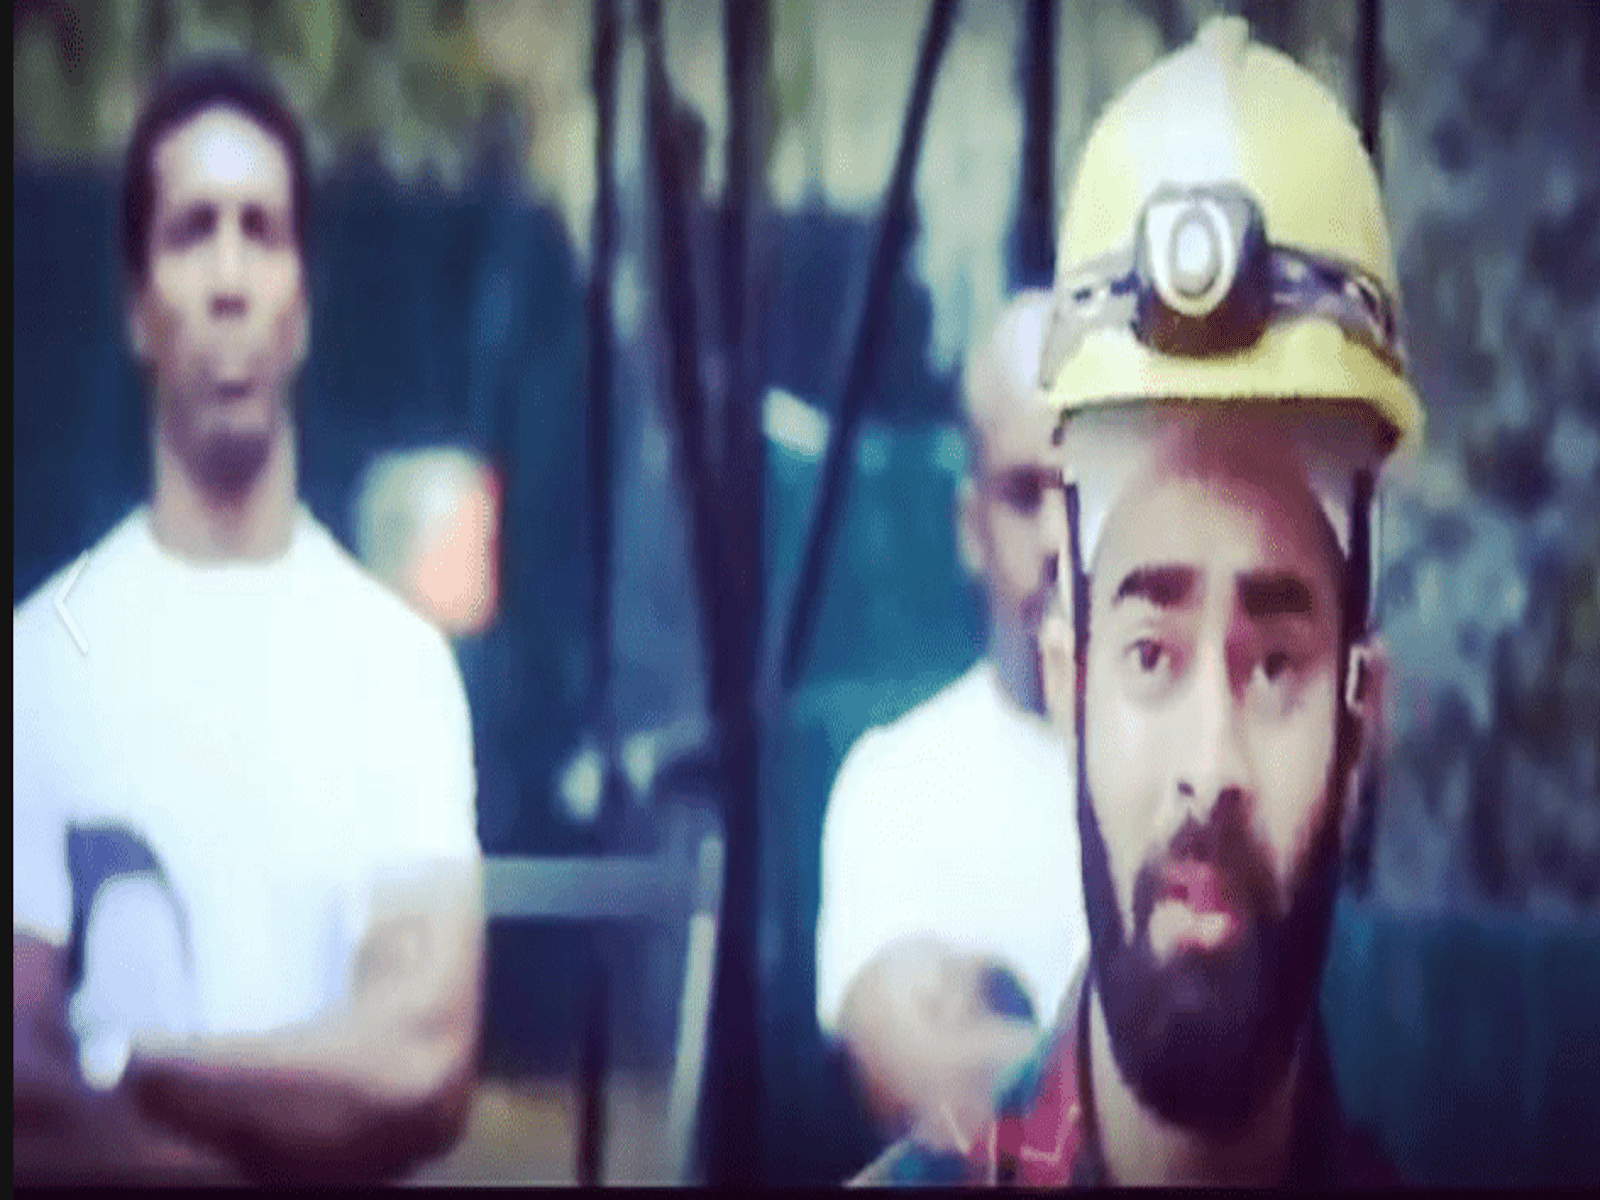 Fenix HL30 in Bollywood Movies, Fenix HL30 Powerful Rechargeable Headlamp in India, Hands free Lighting, Fukrey Returns 